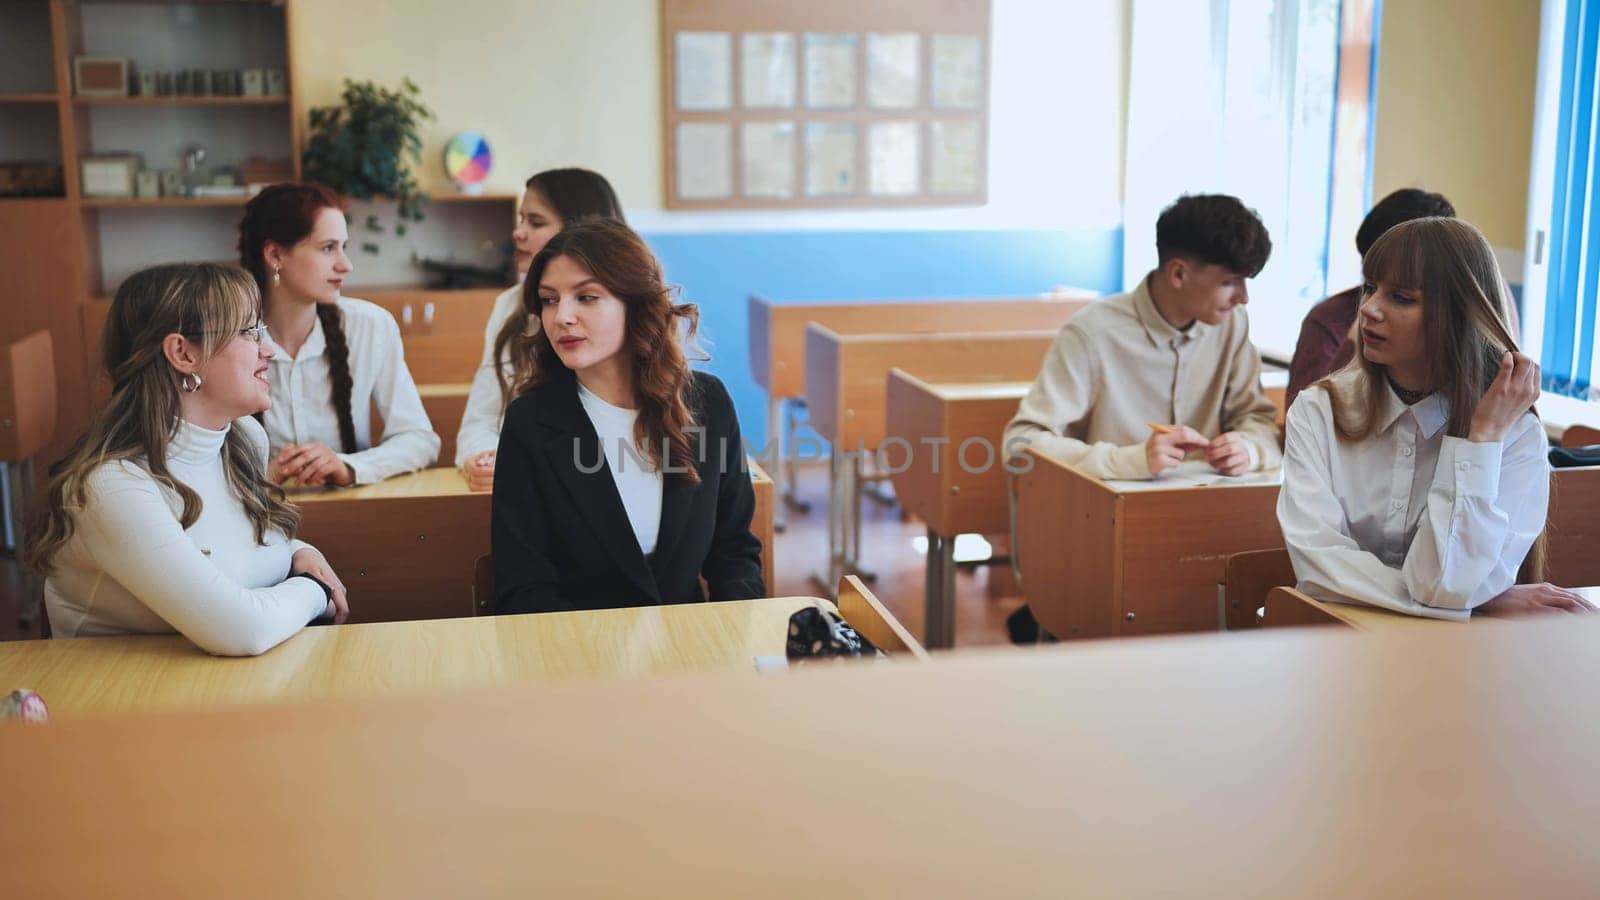 High school seniors in the classroom. by DovidPro